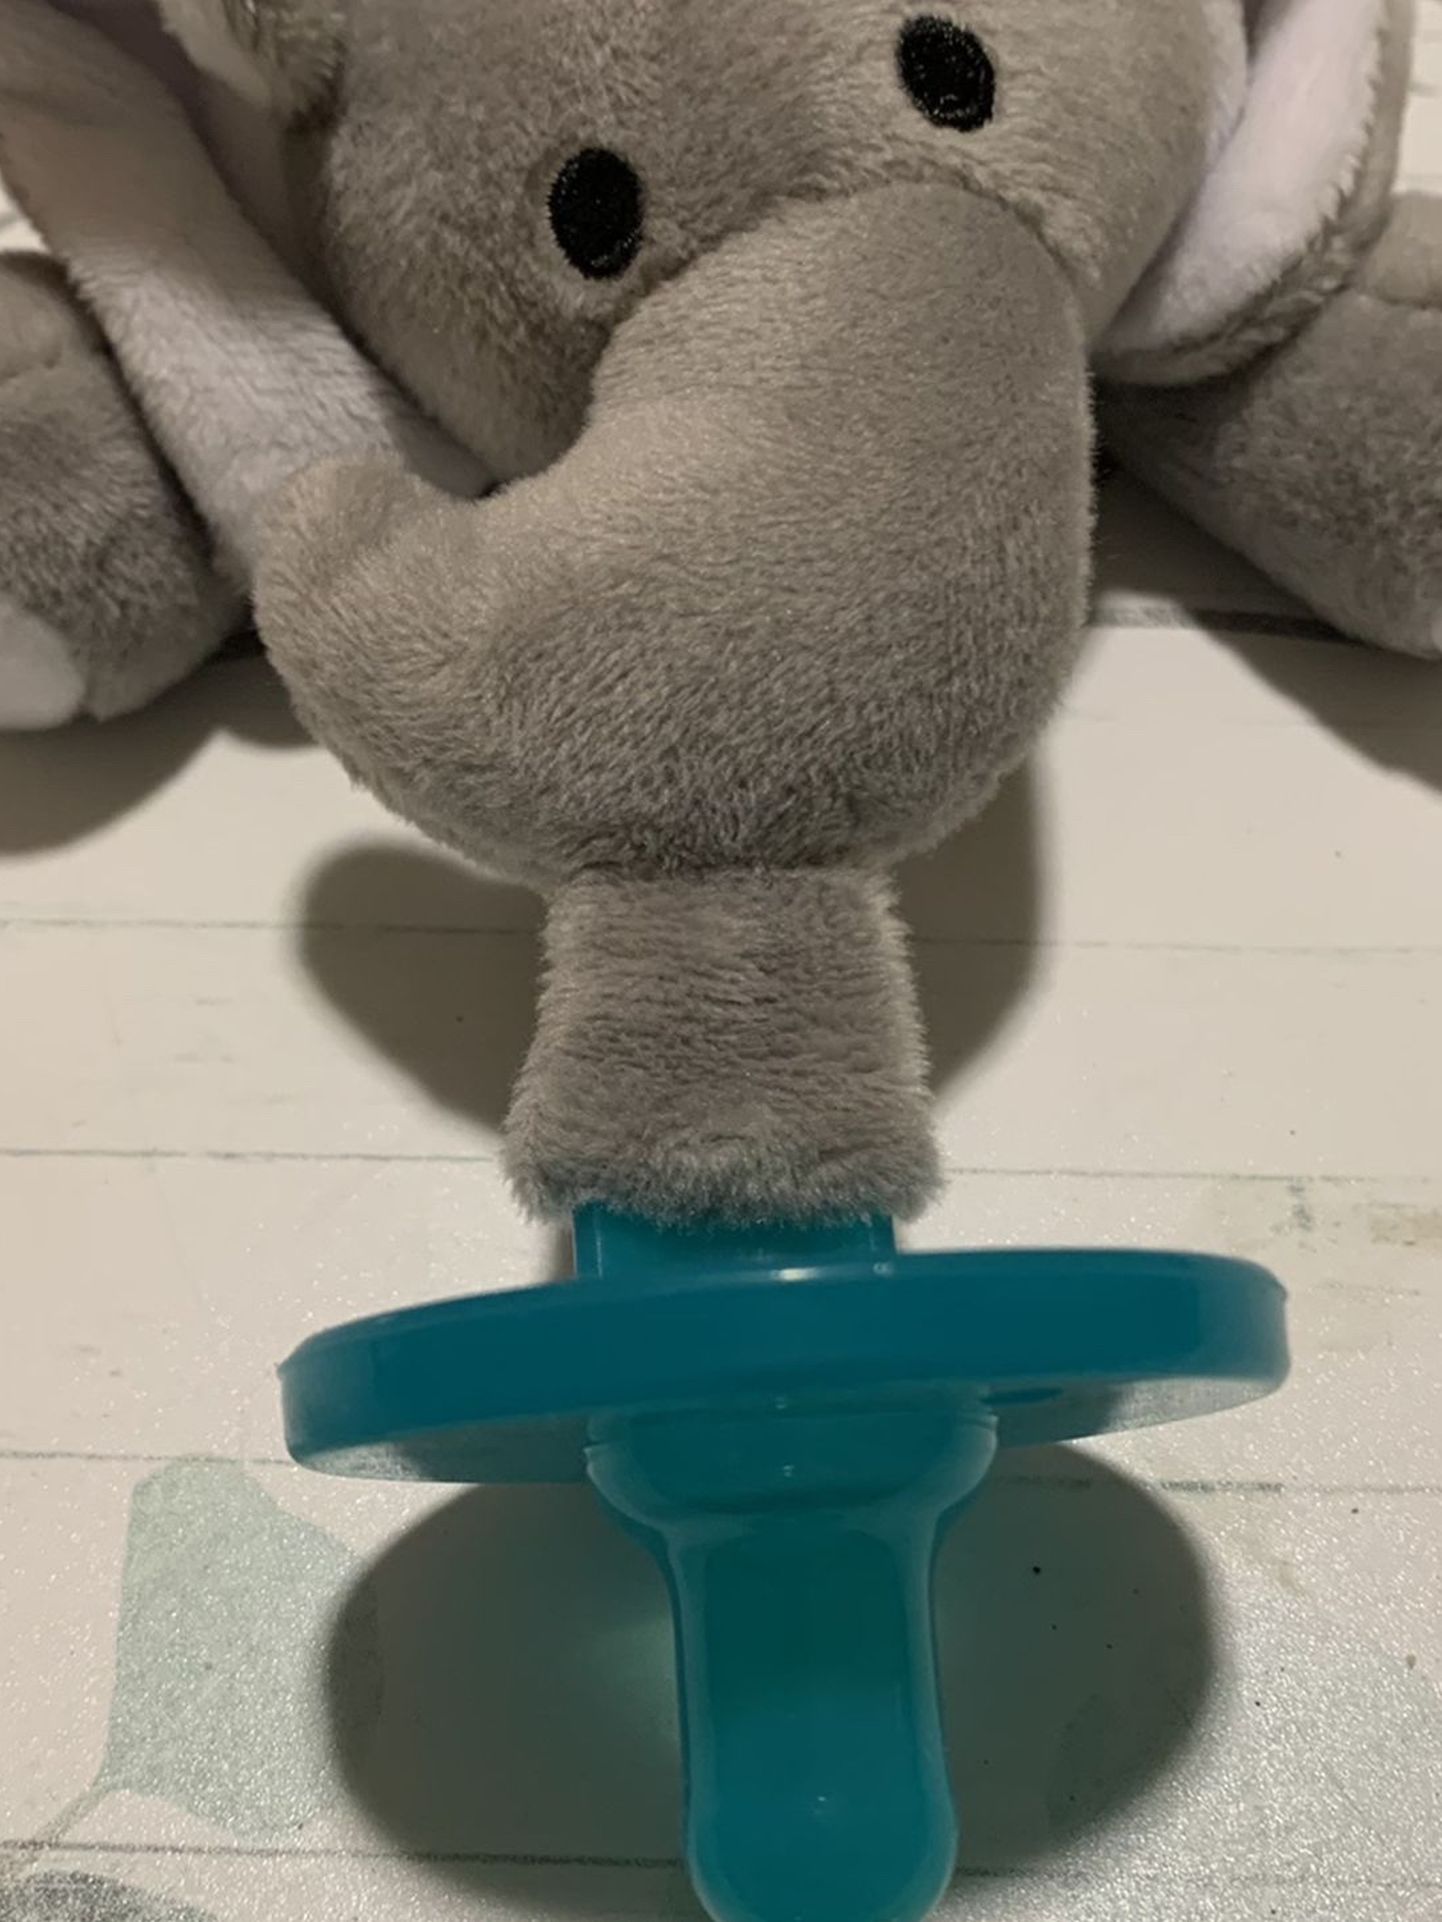 Baby Stuffed Animal With Pacifier